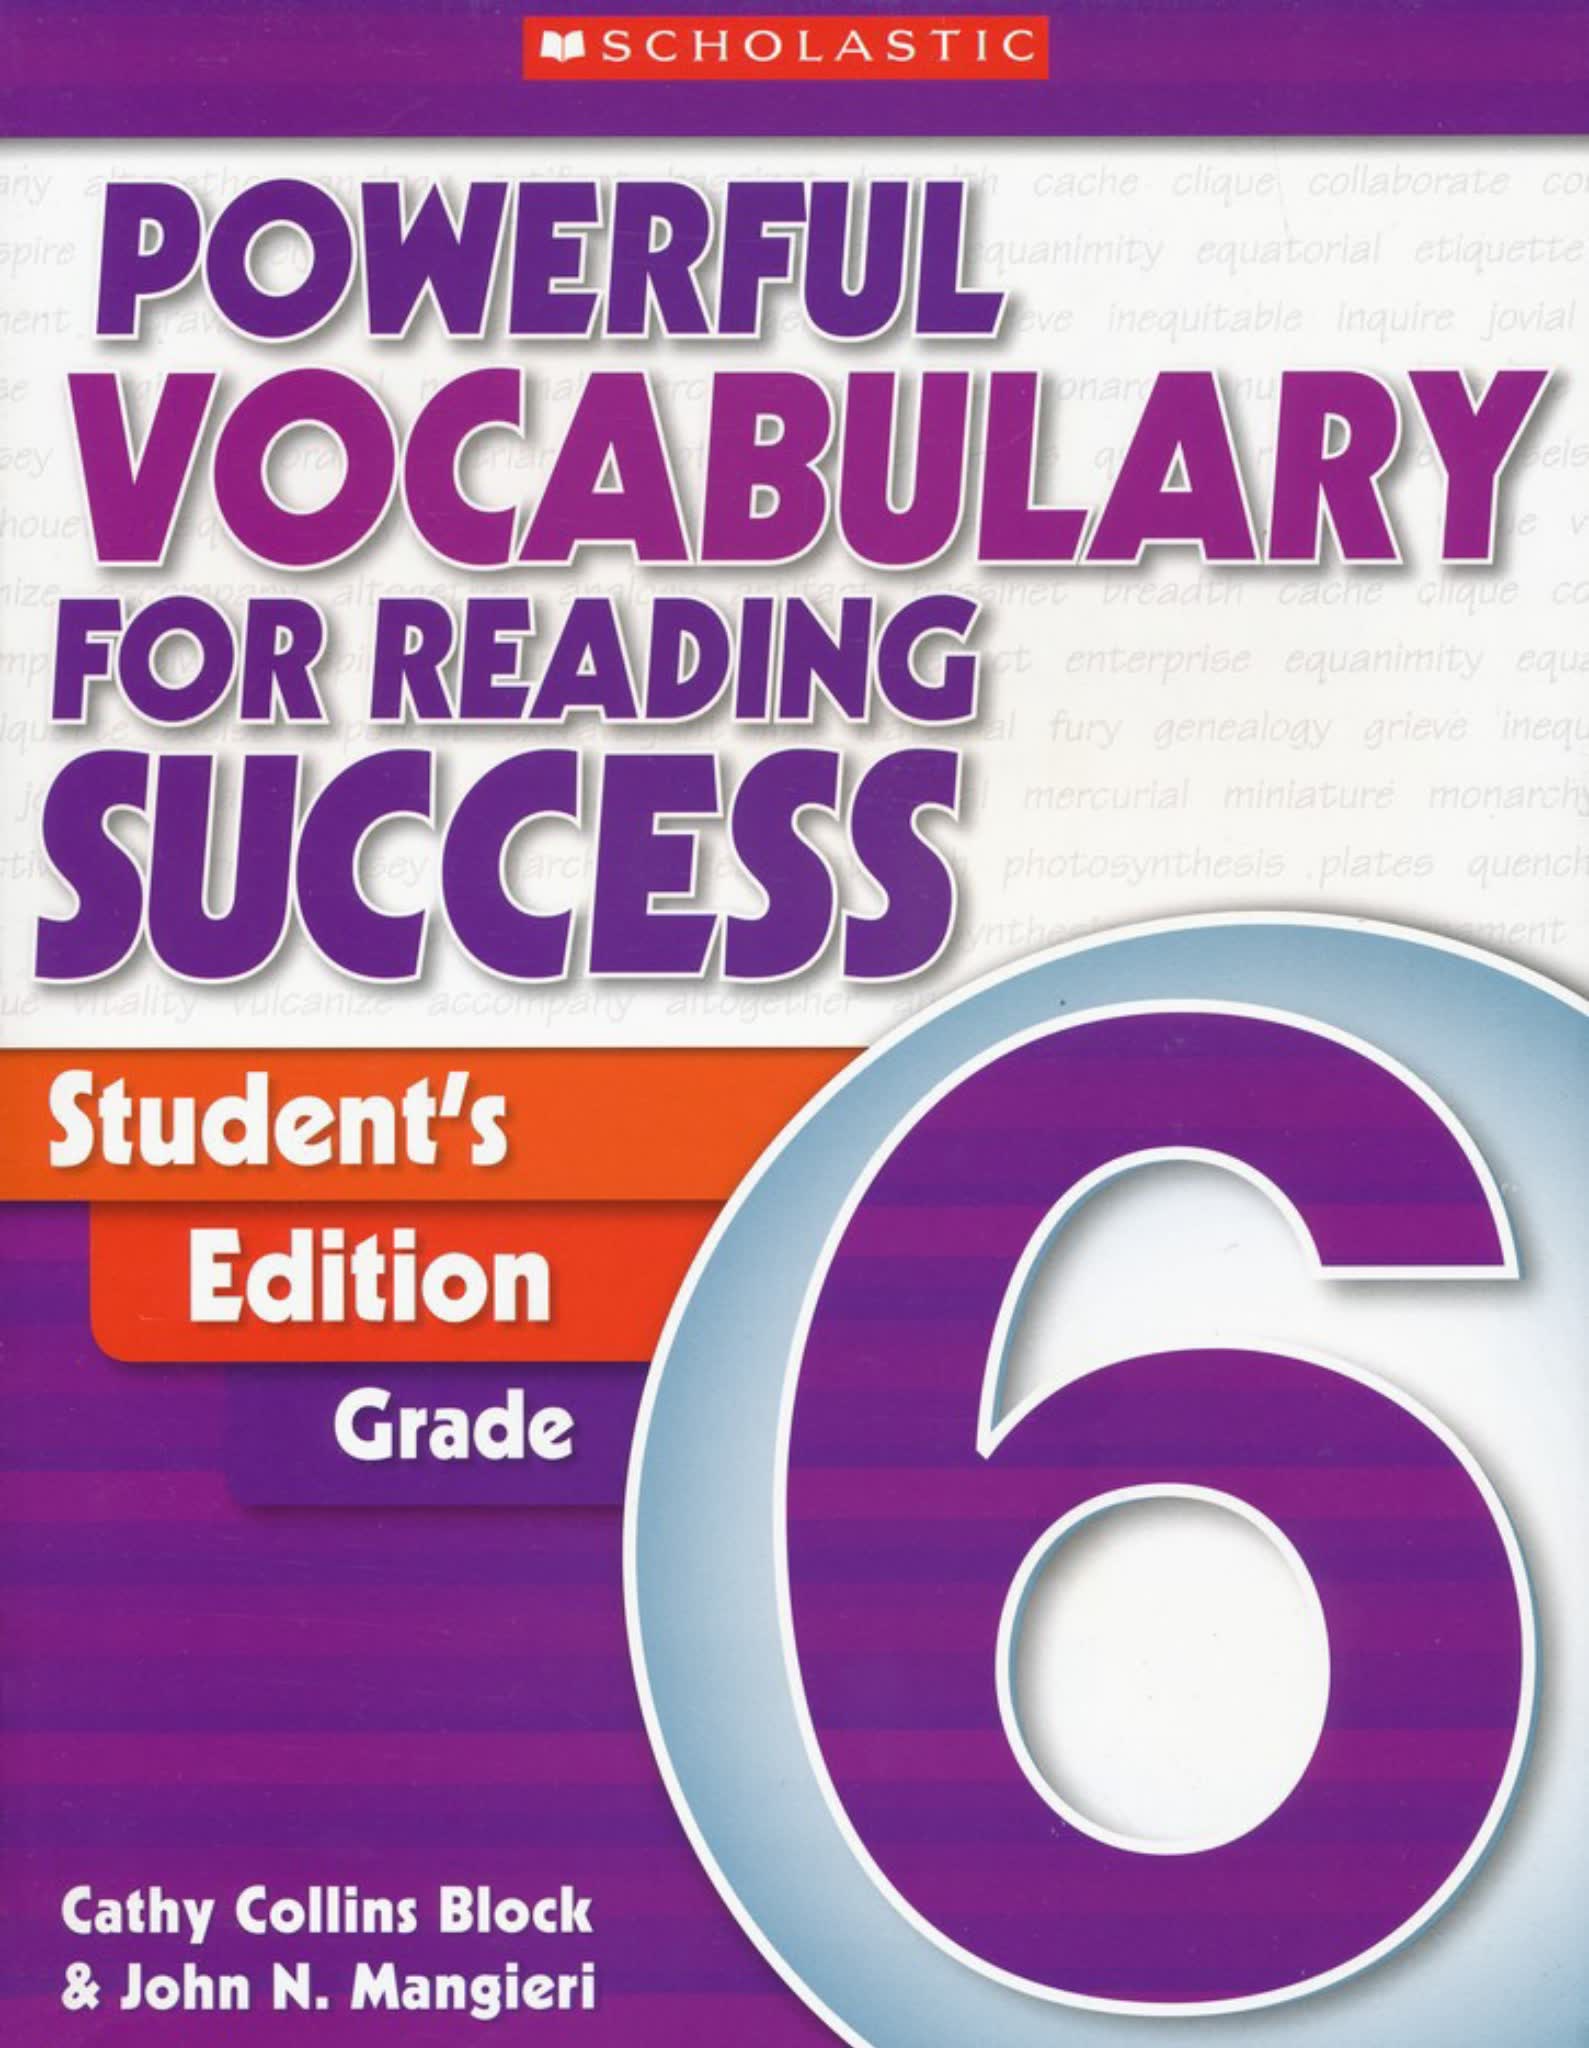 Powerful-Vocabulary-for-Reading-Success-Students-Edition